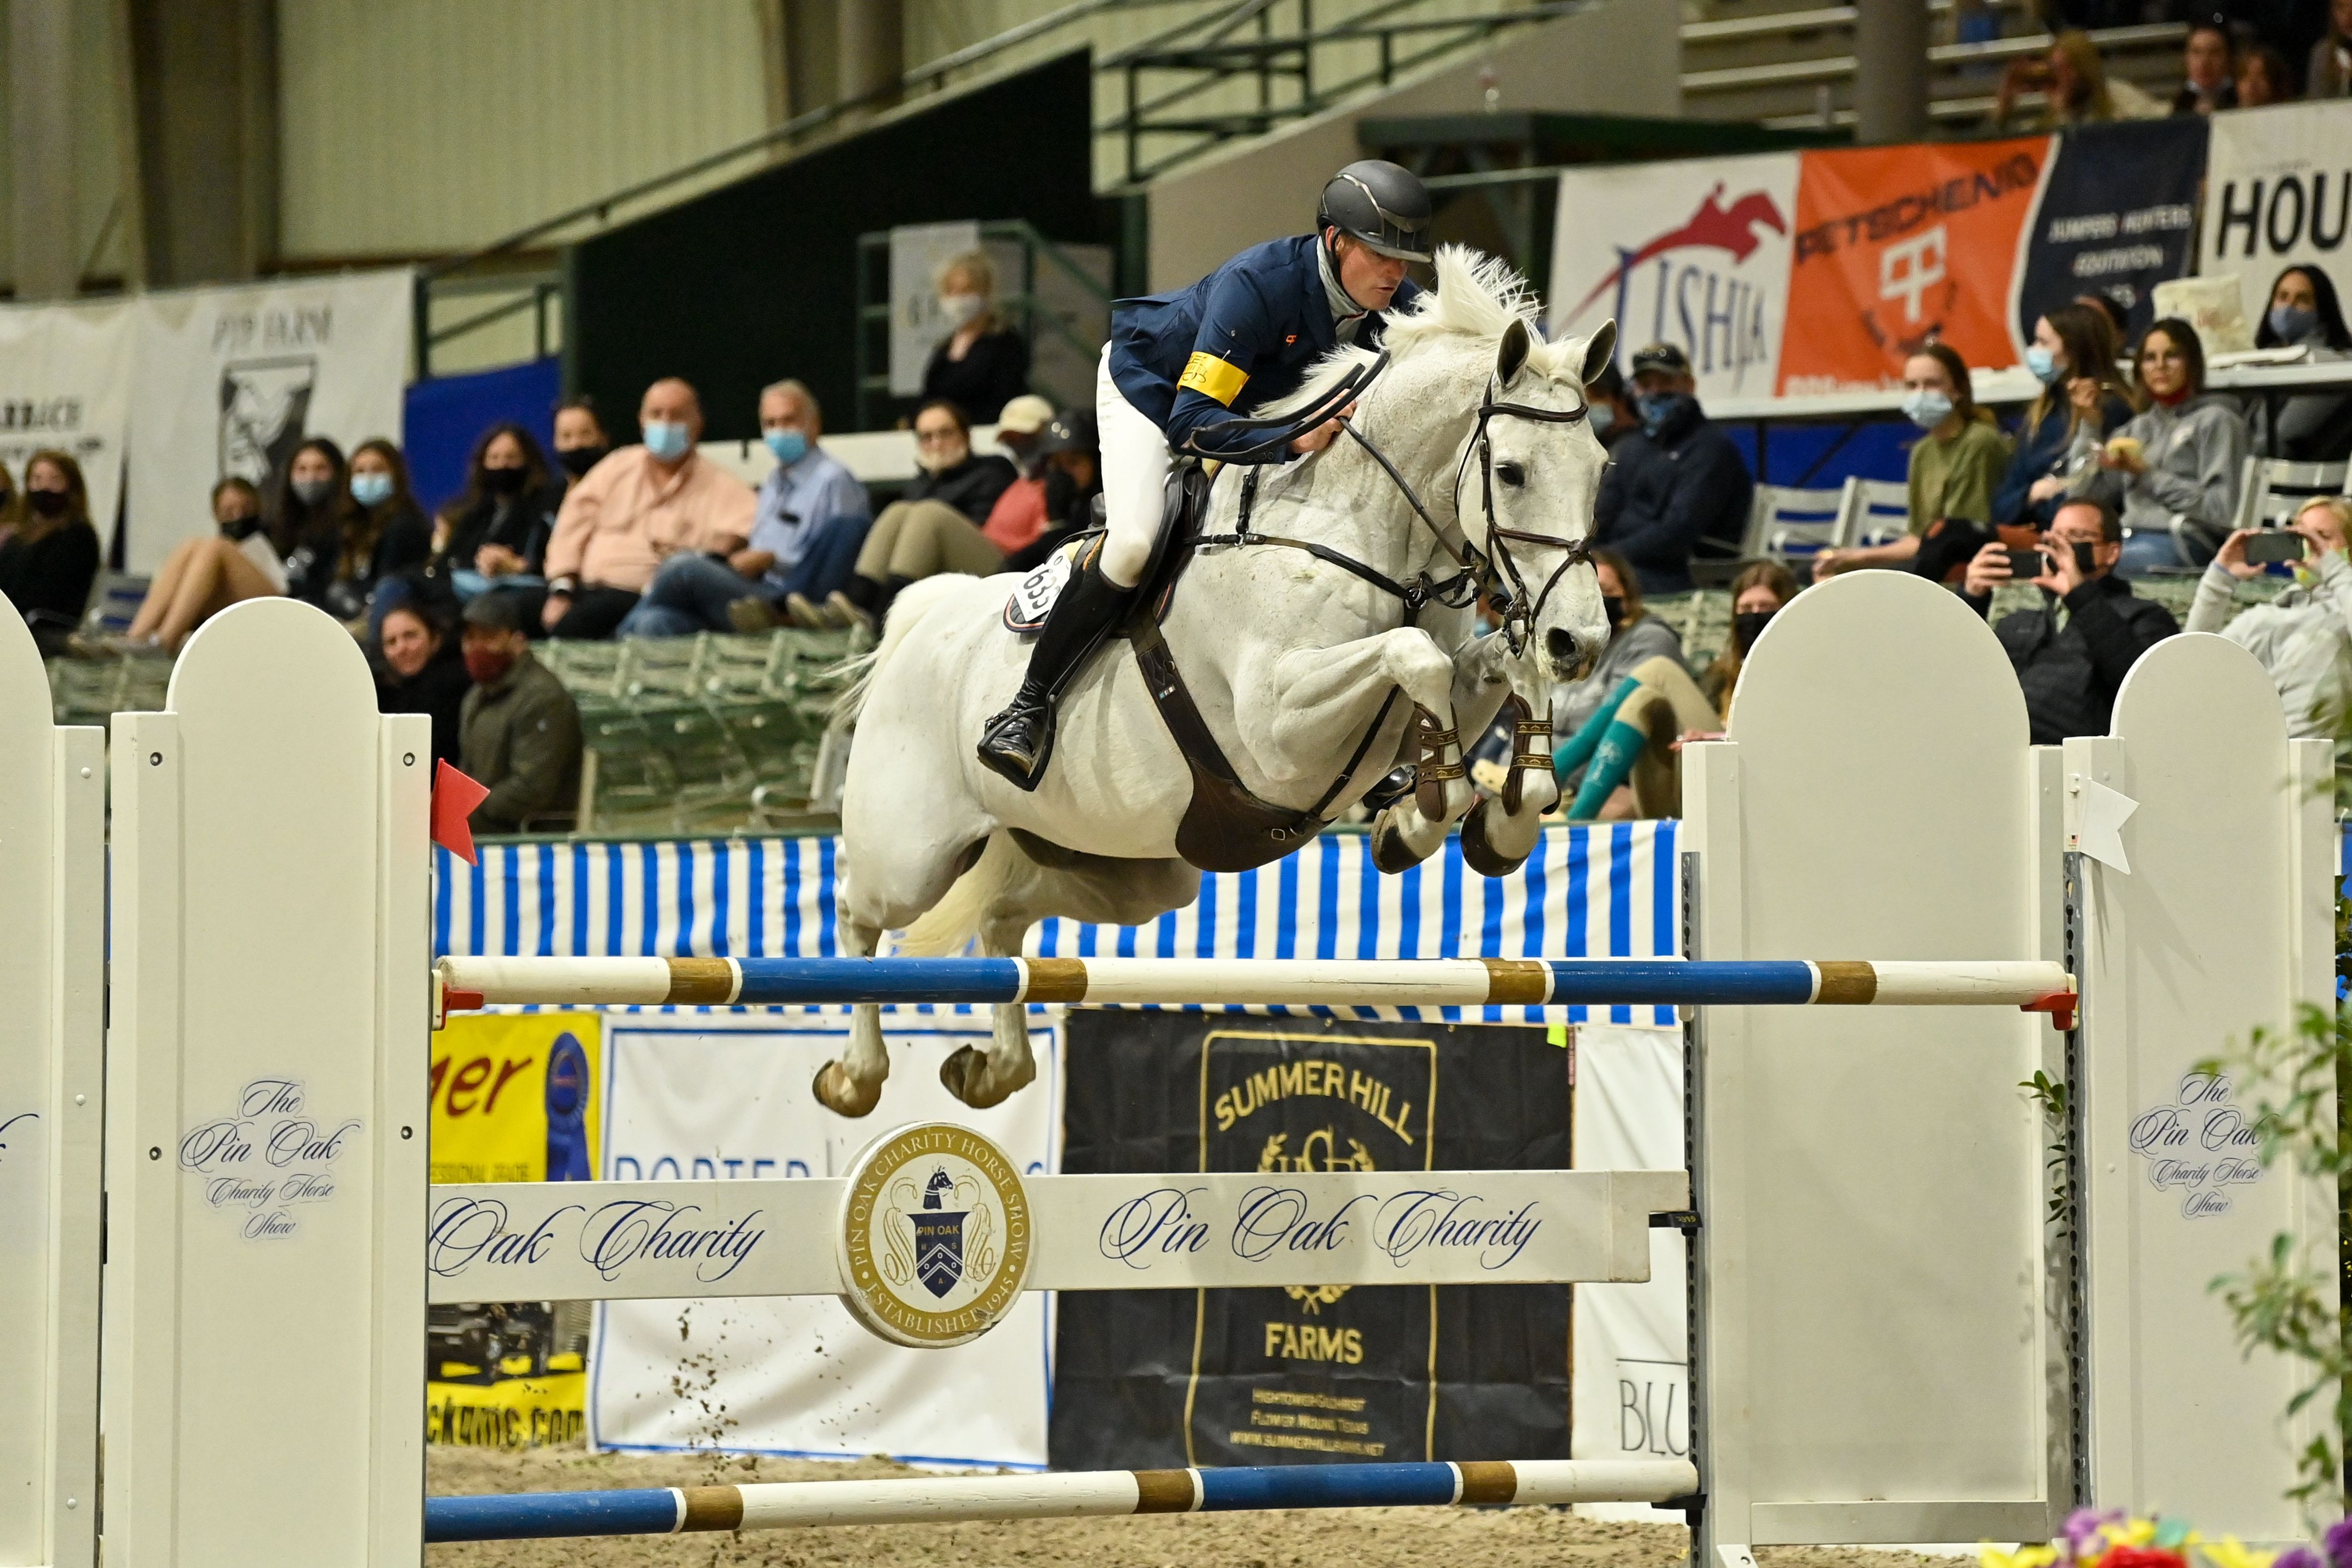 Horse and Country Unveils Extensive Live Coverage of the 2022 Pin Oak Charity Horse Show